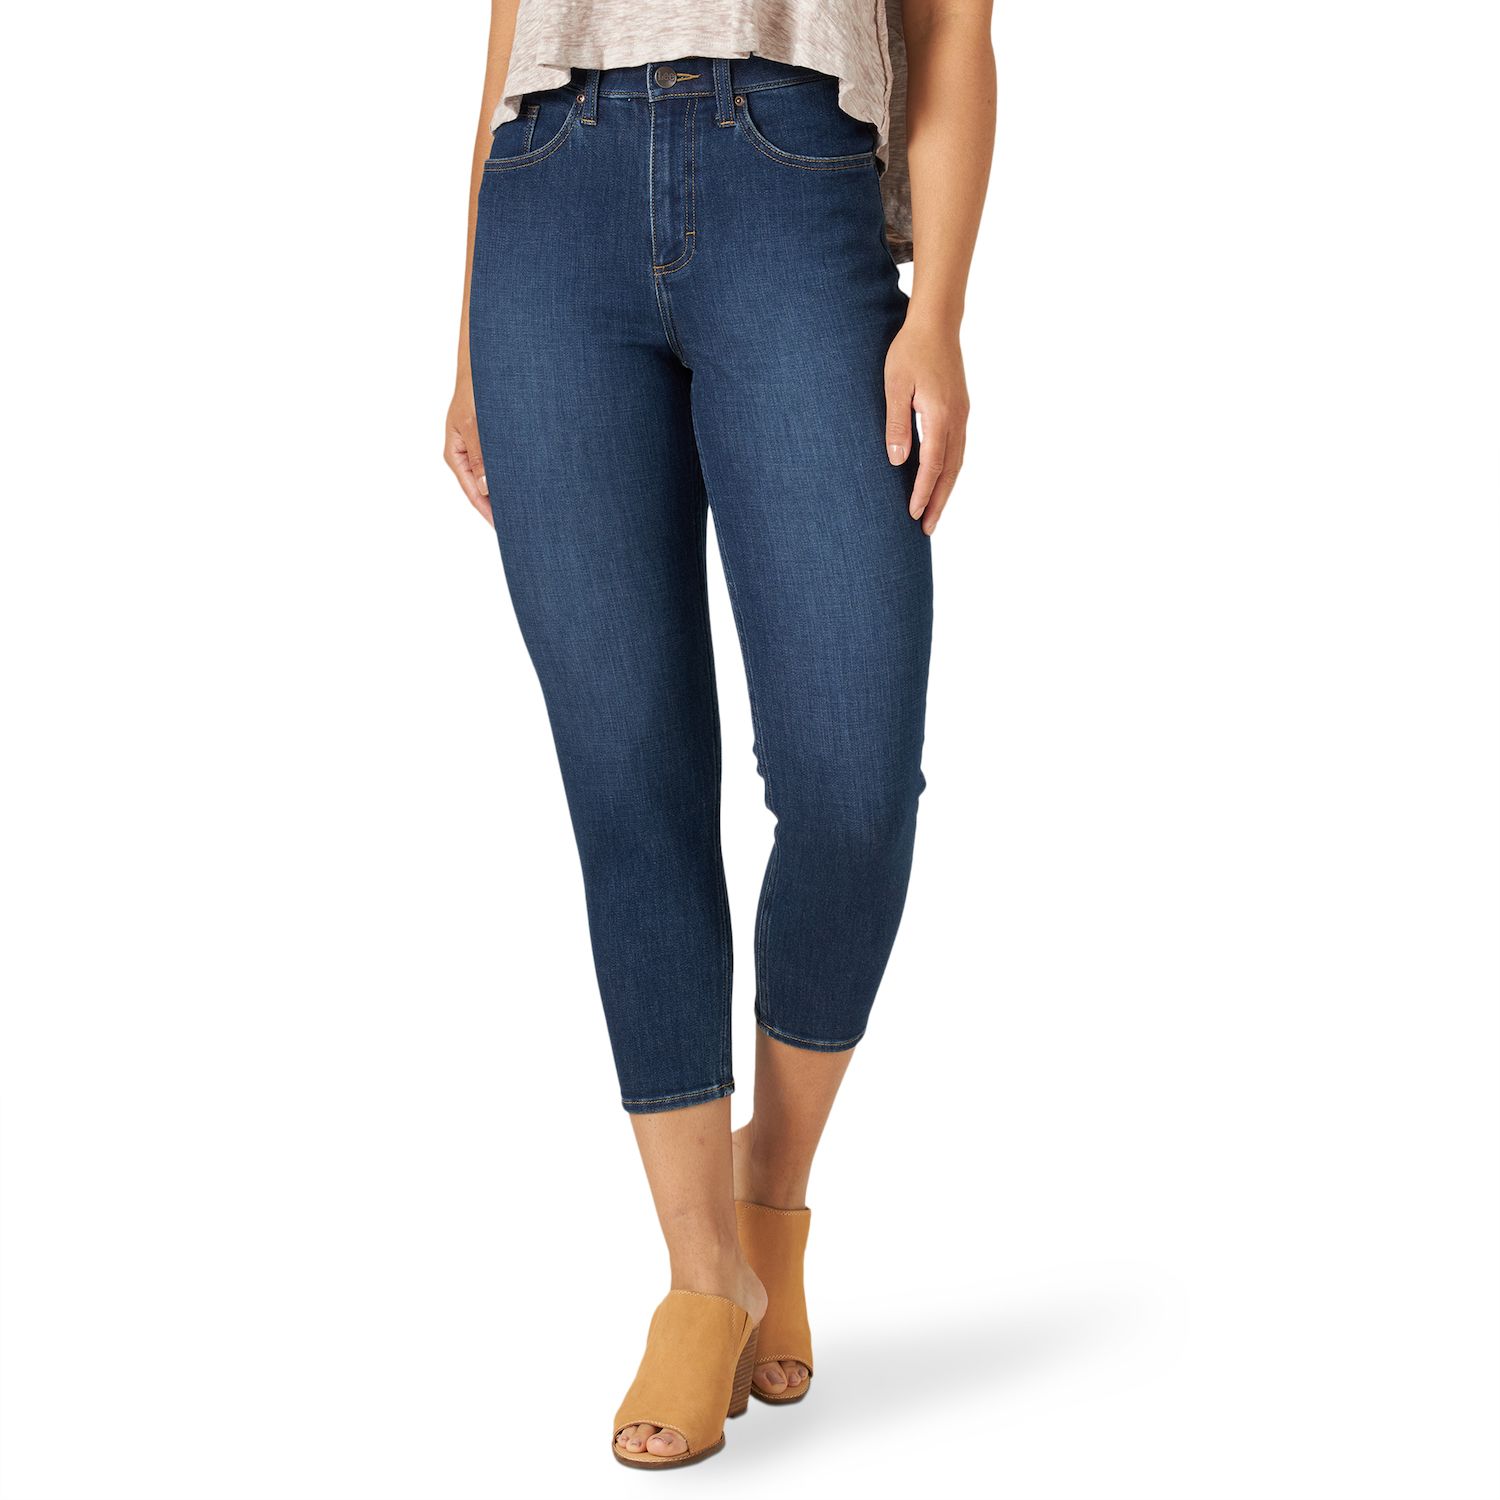 Image for Lee Women's Ultra Lux Tapered Crop Jeans at Kohl's.